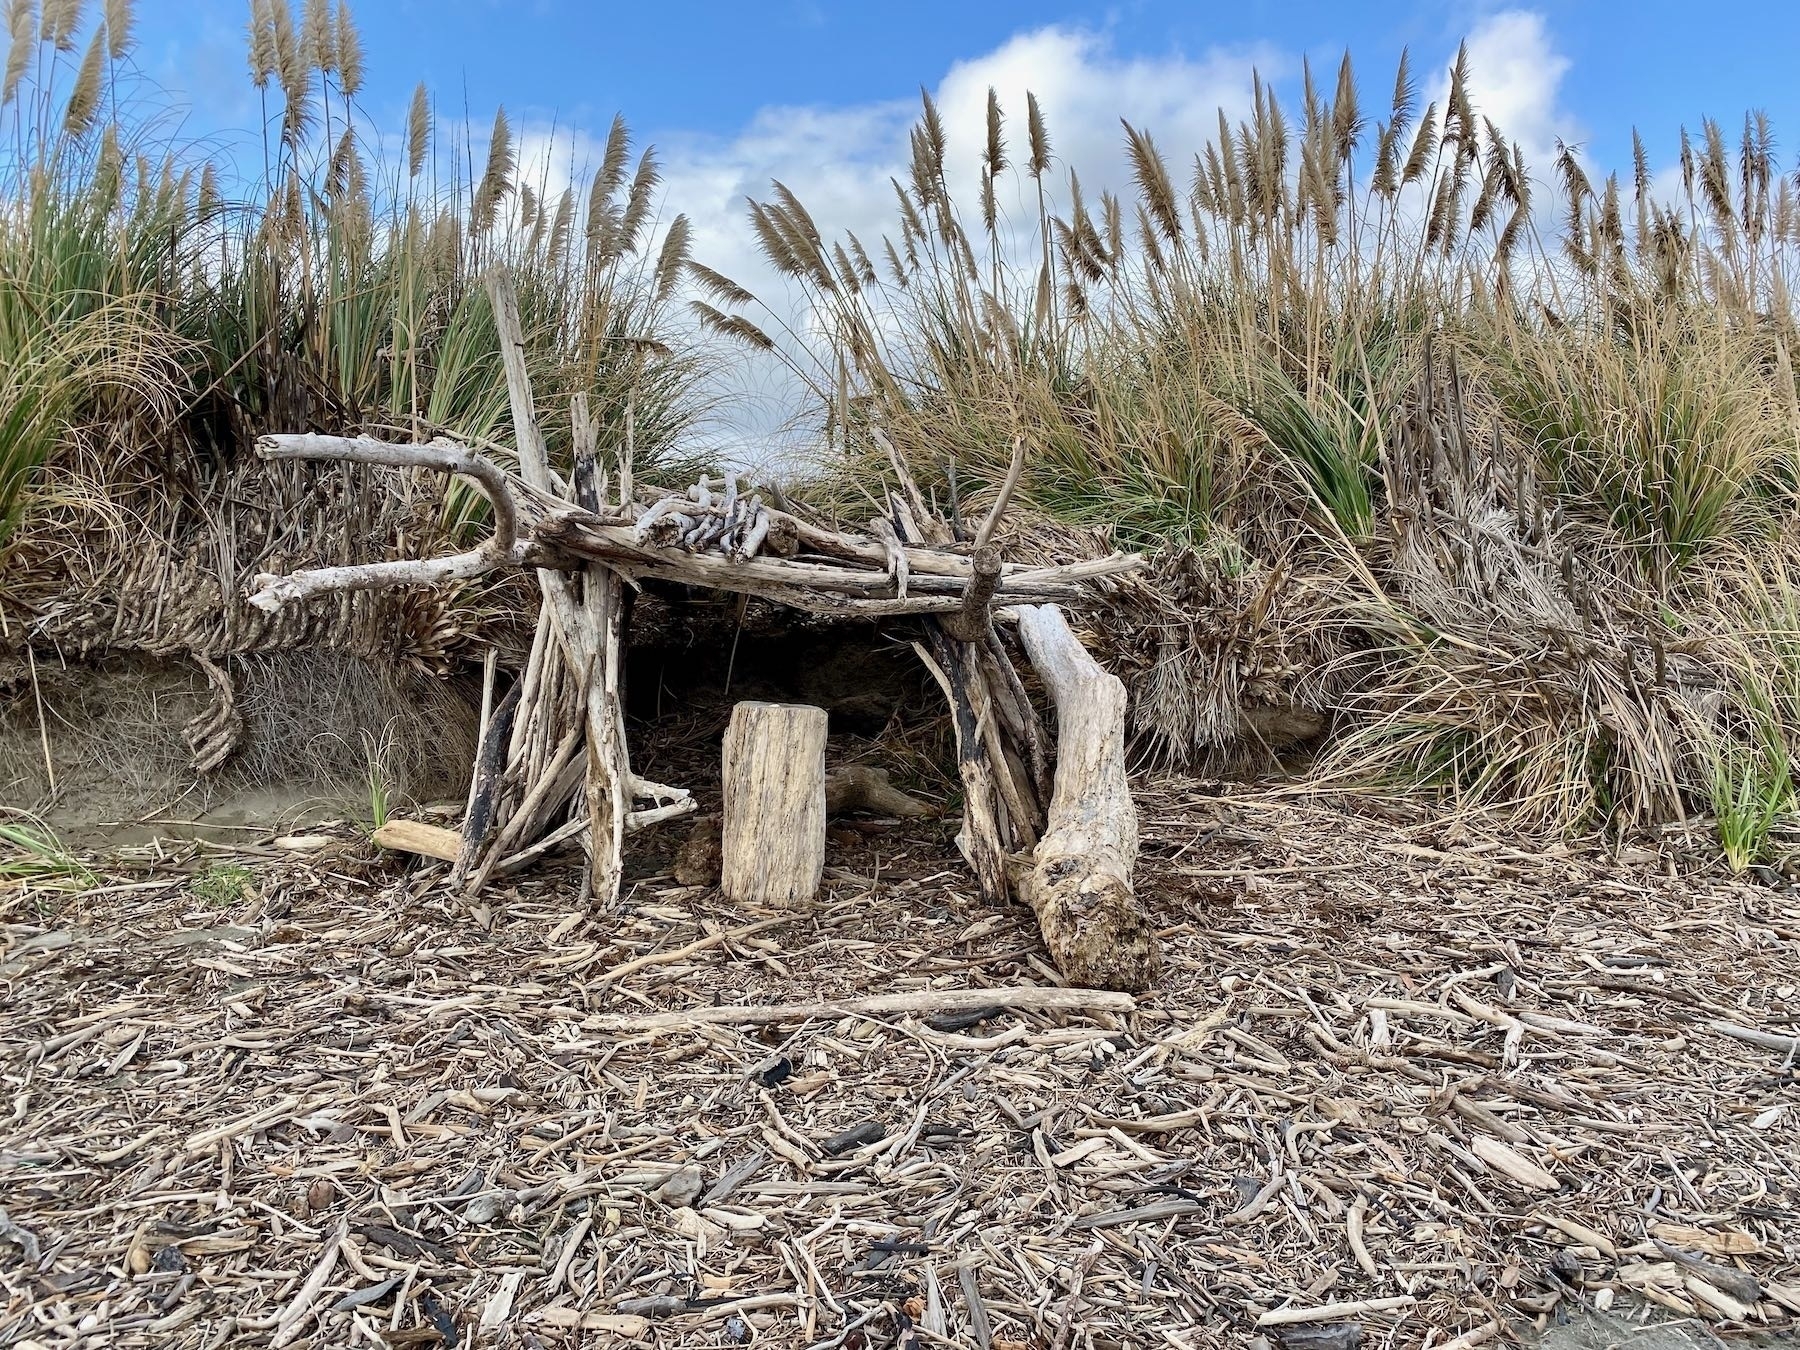 Shelter made of pieces of driftwood. 